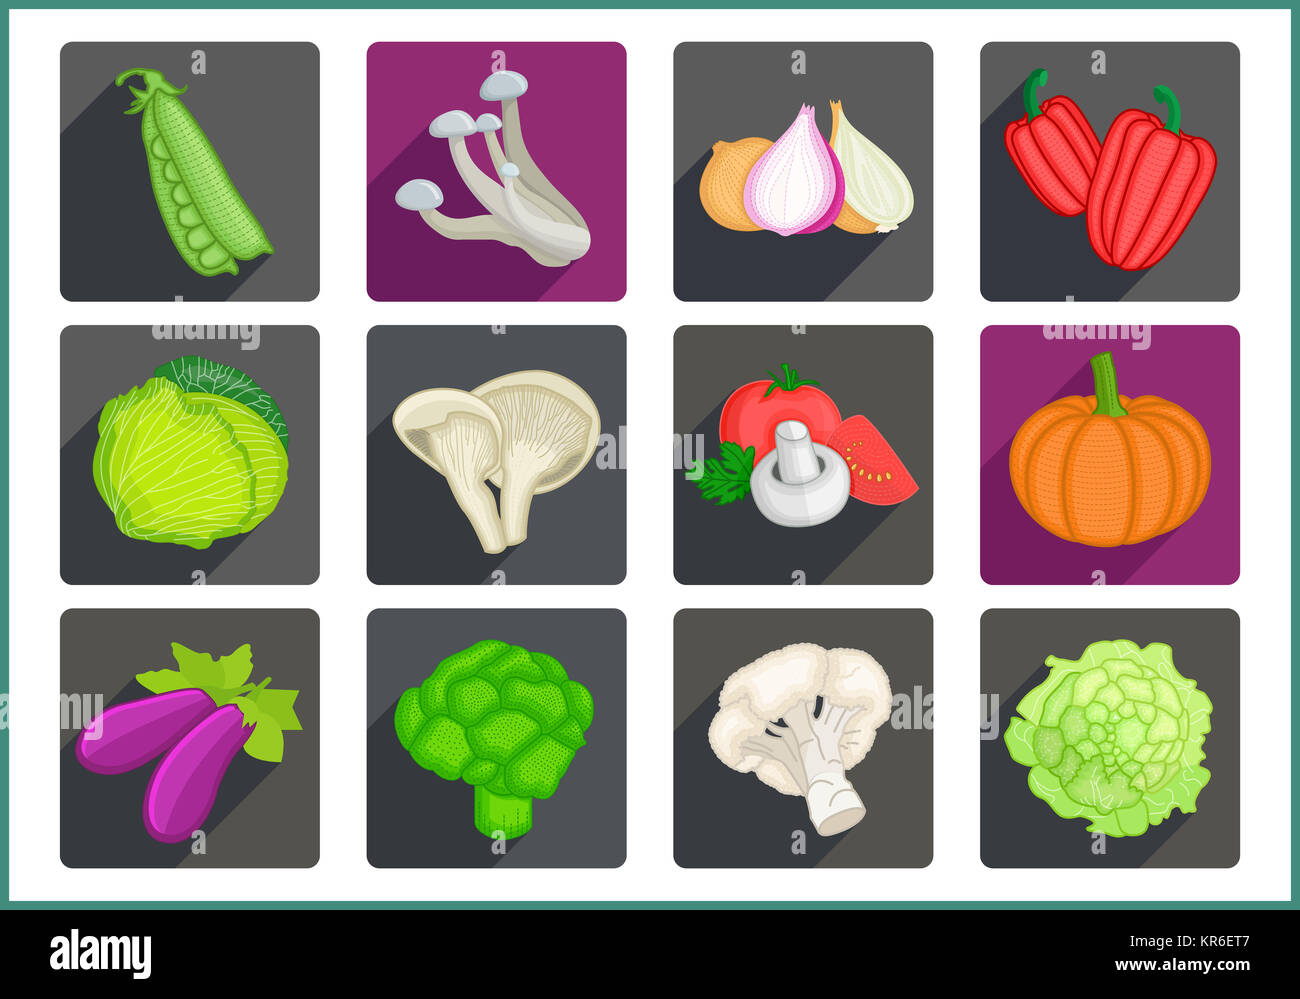 Vegetables flat vector icons set Stock Photo